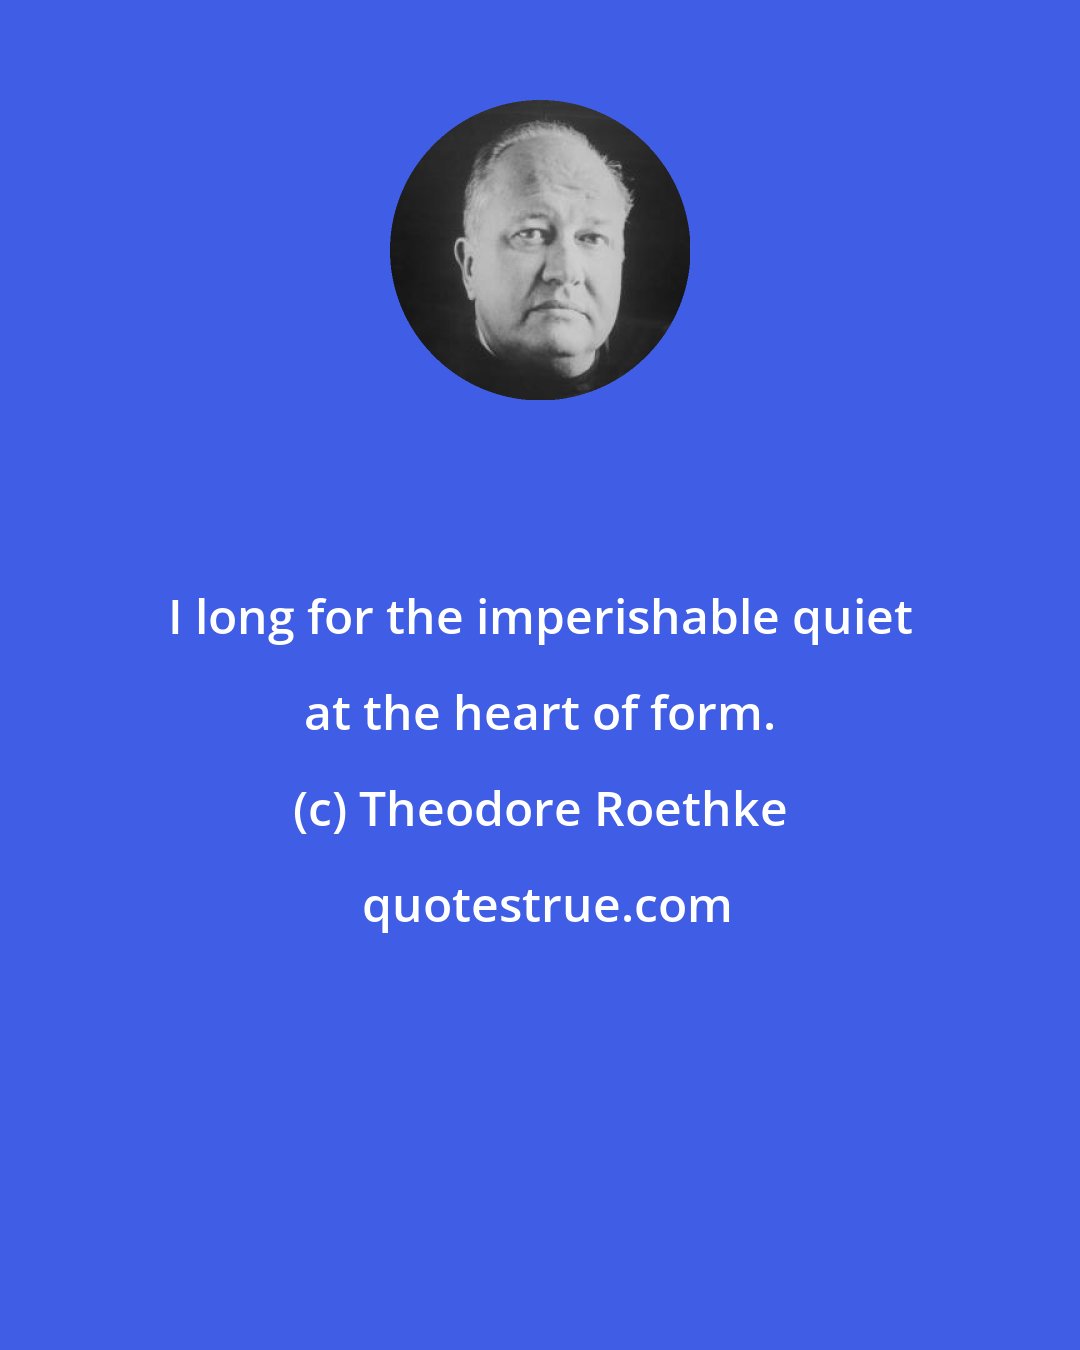 Theodore Roethke: I long for the imperishable quiet at the heart of form.